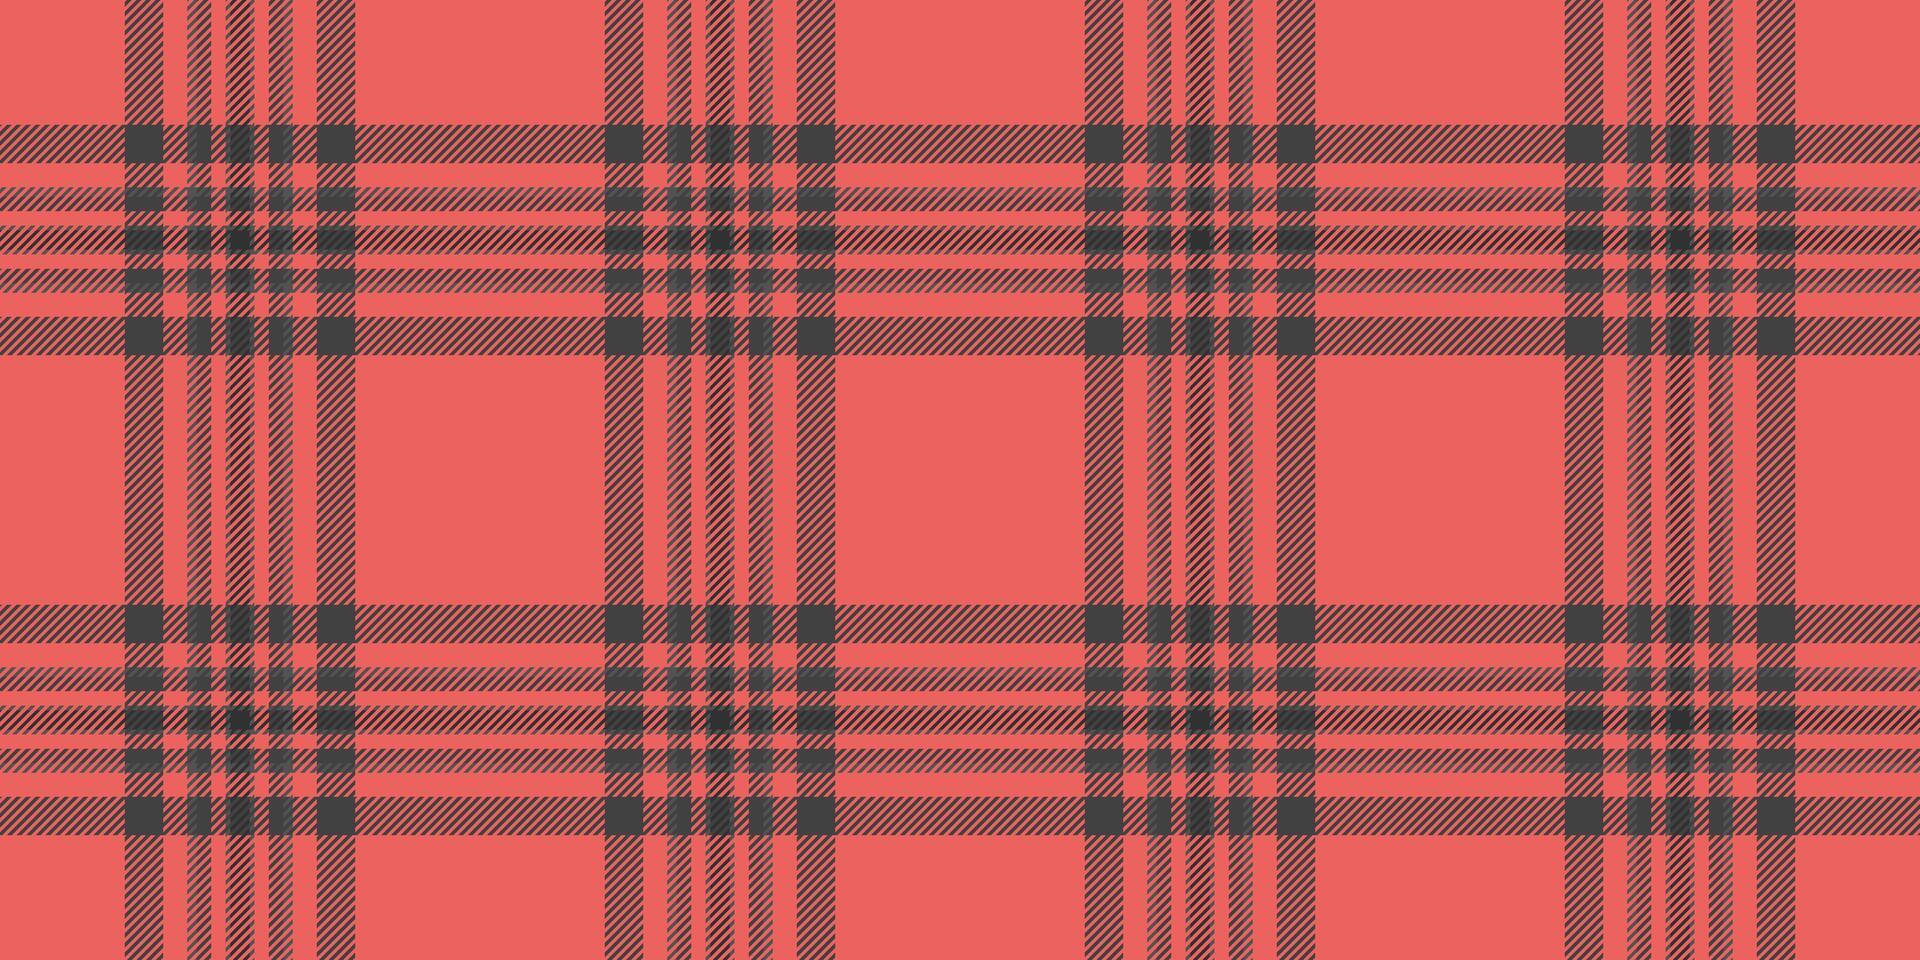 Event tartan texture pattern, diamond textile vector background. Windowpane fabric check plaid seamless in grey and red colors.